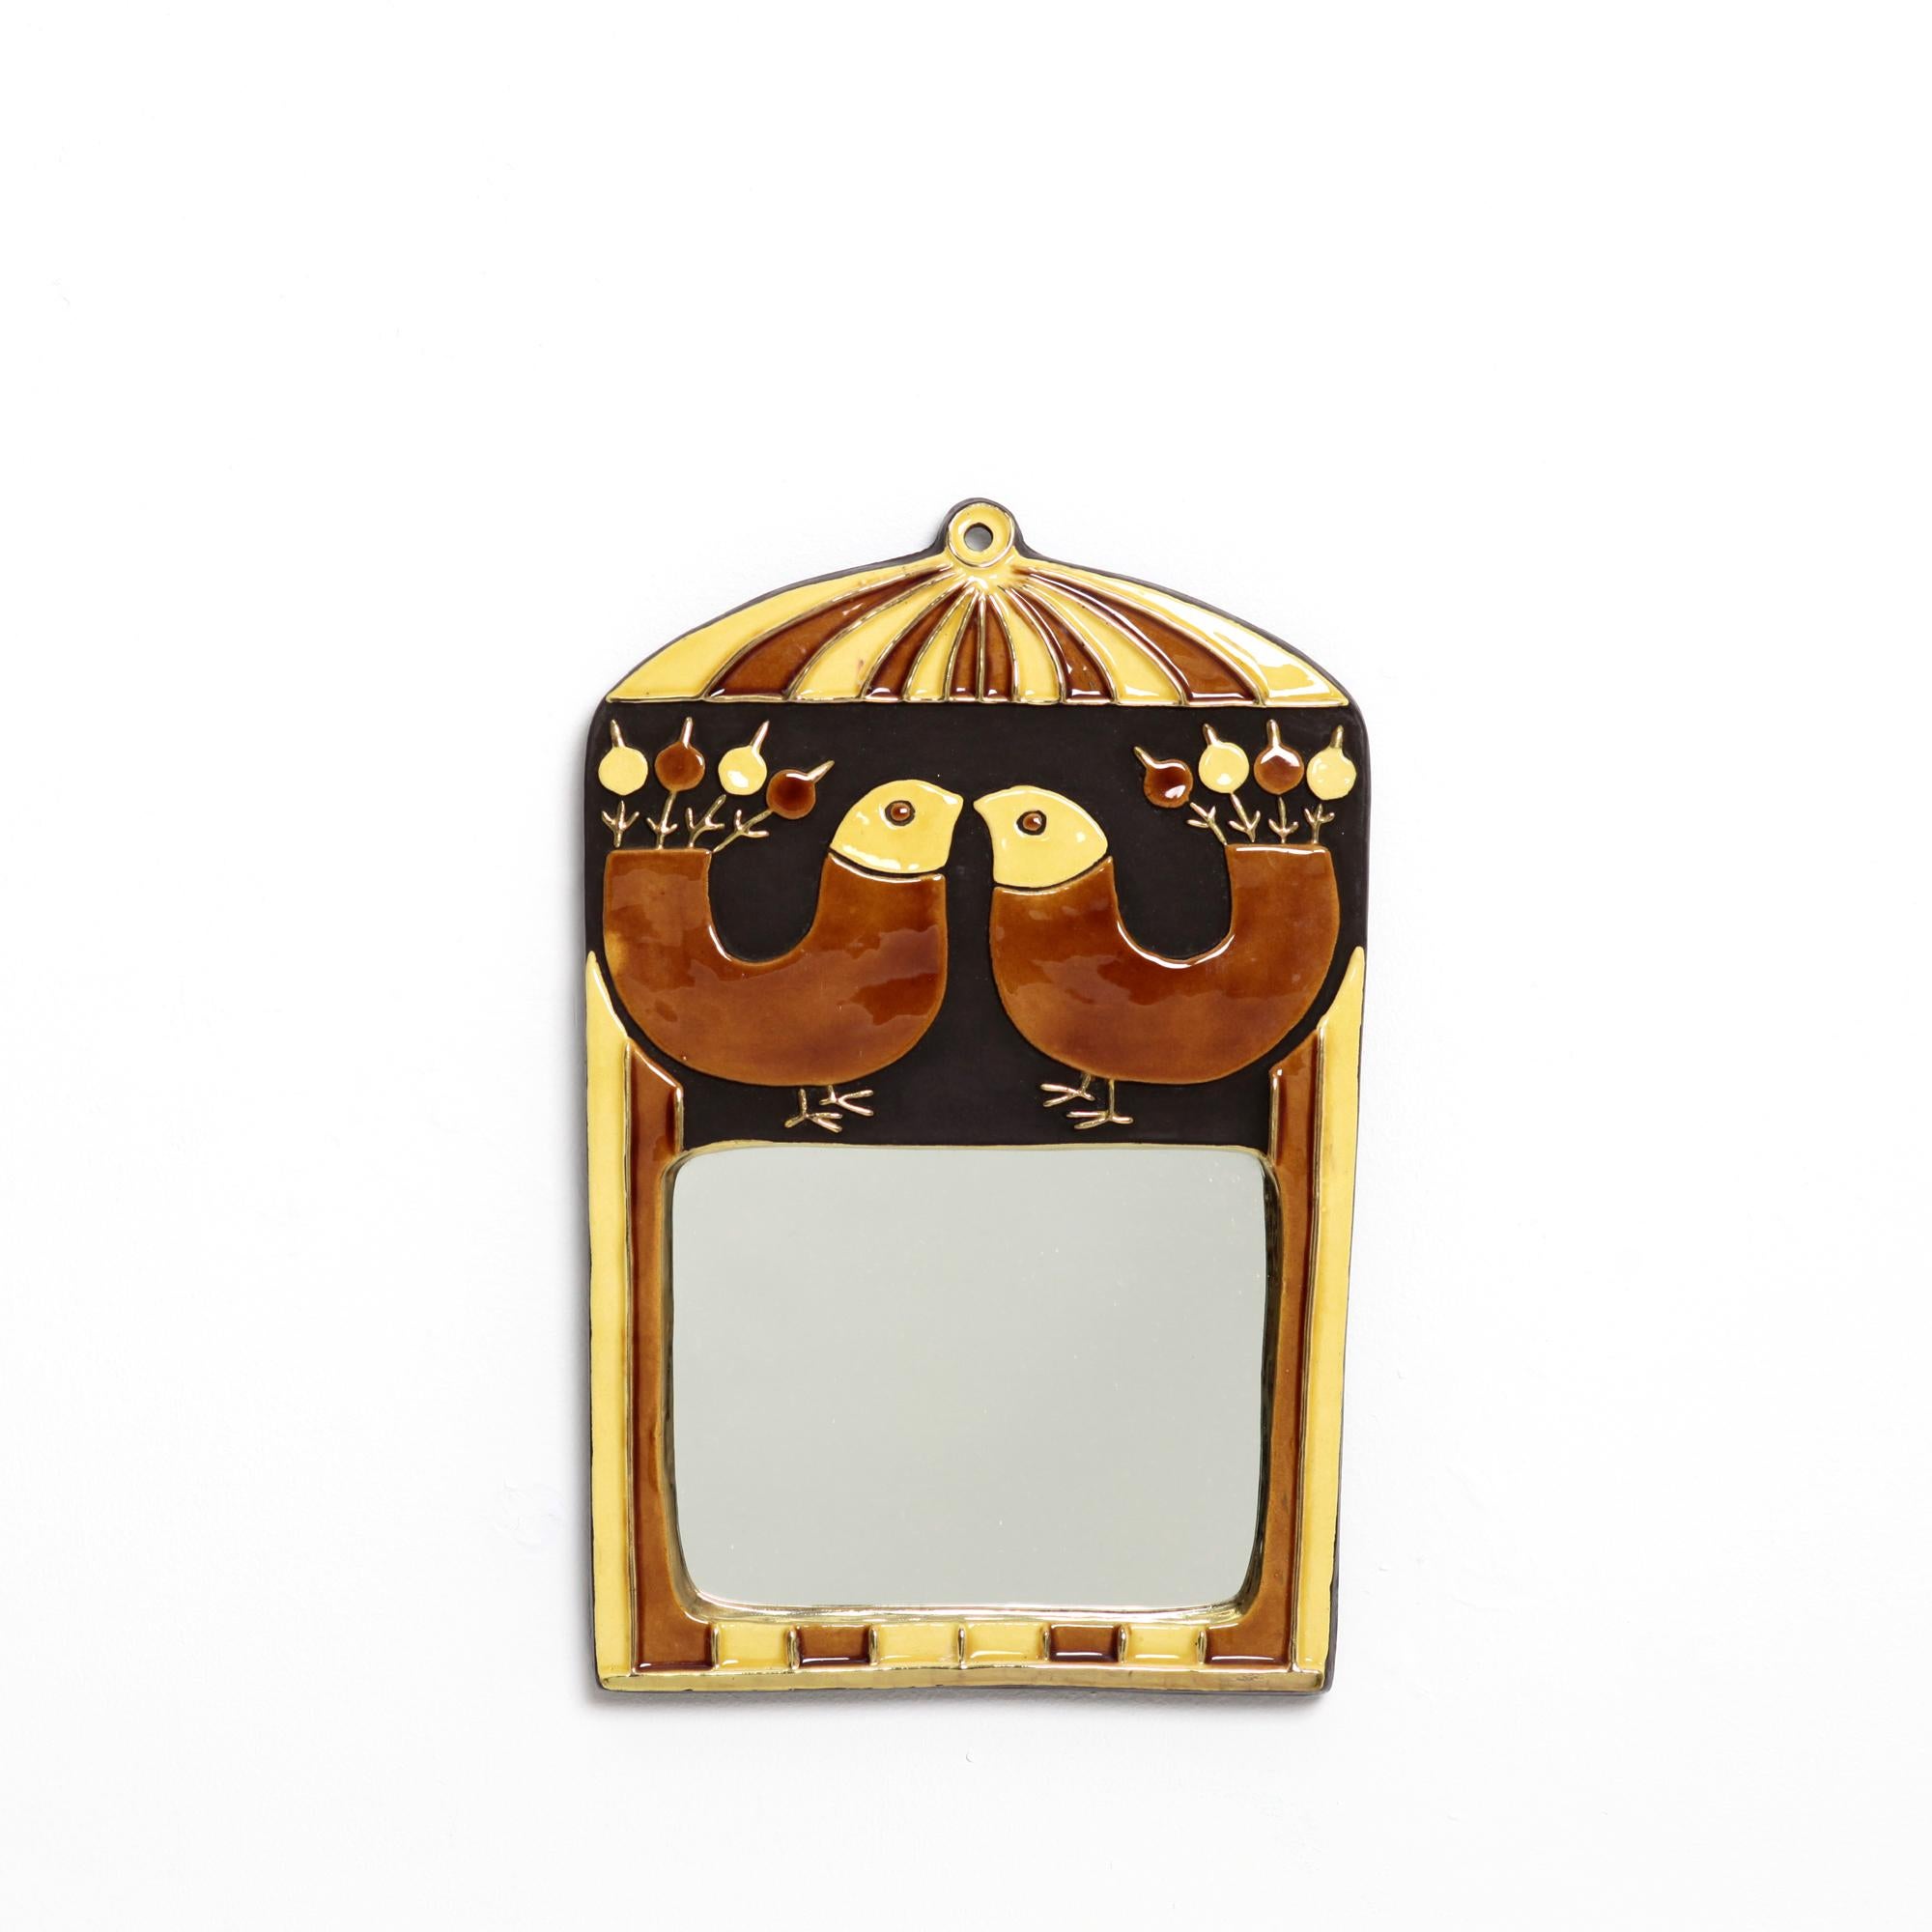 A wall mirror designed in the 1960s, fancyfully decorated with a cracked gold outline framing the representation of 2 birds in straw yellow and caramel brown and gold enamel, the decoration treated in light relief. Original ice, felt back. H. 31.5